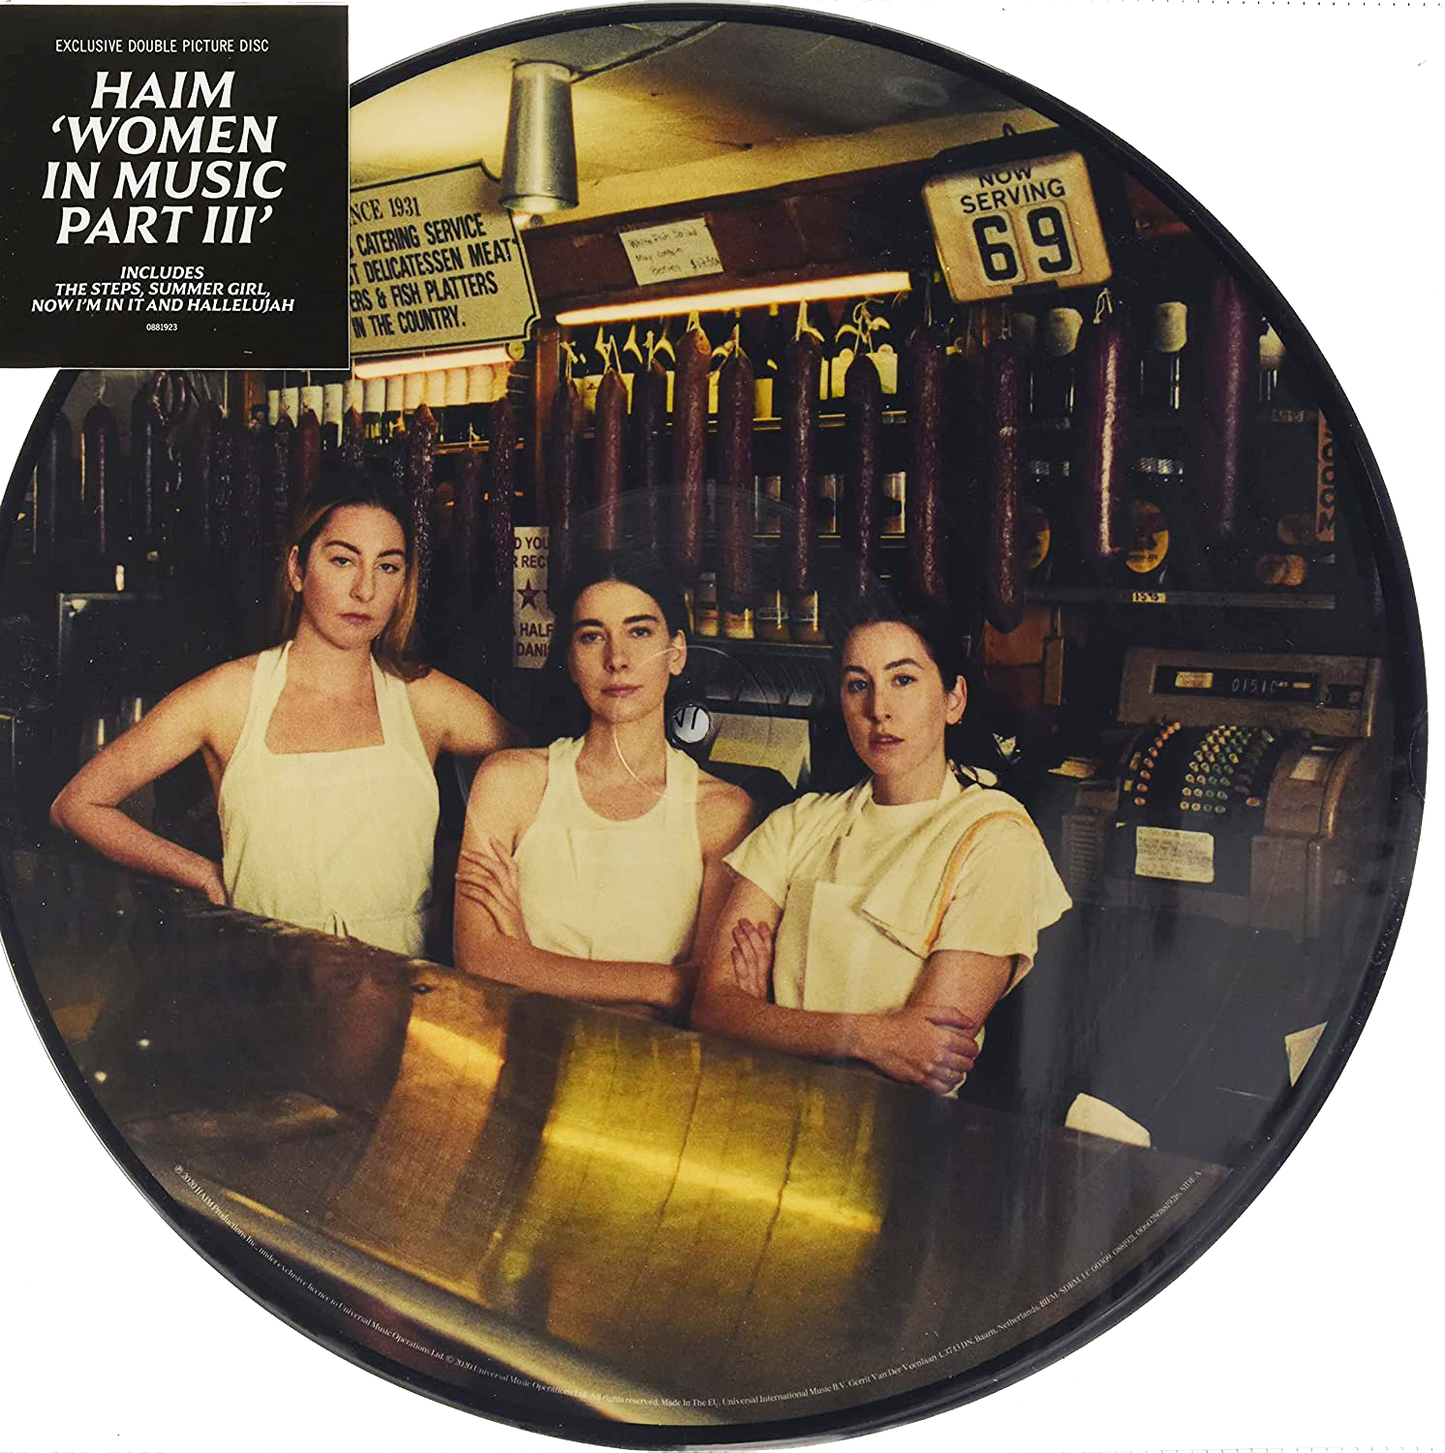 Women in Music Pt. III (Limited Edition 2XLP Picture Disc Vinyl)